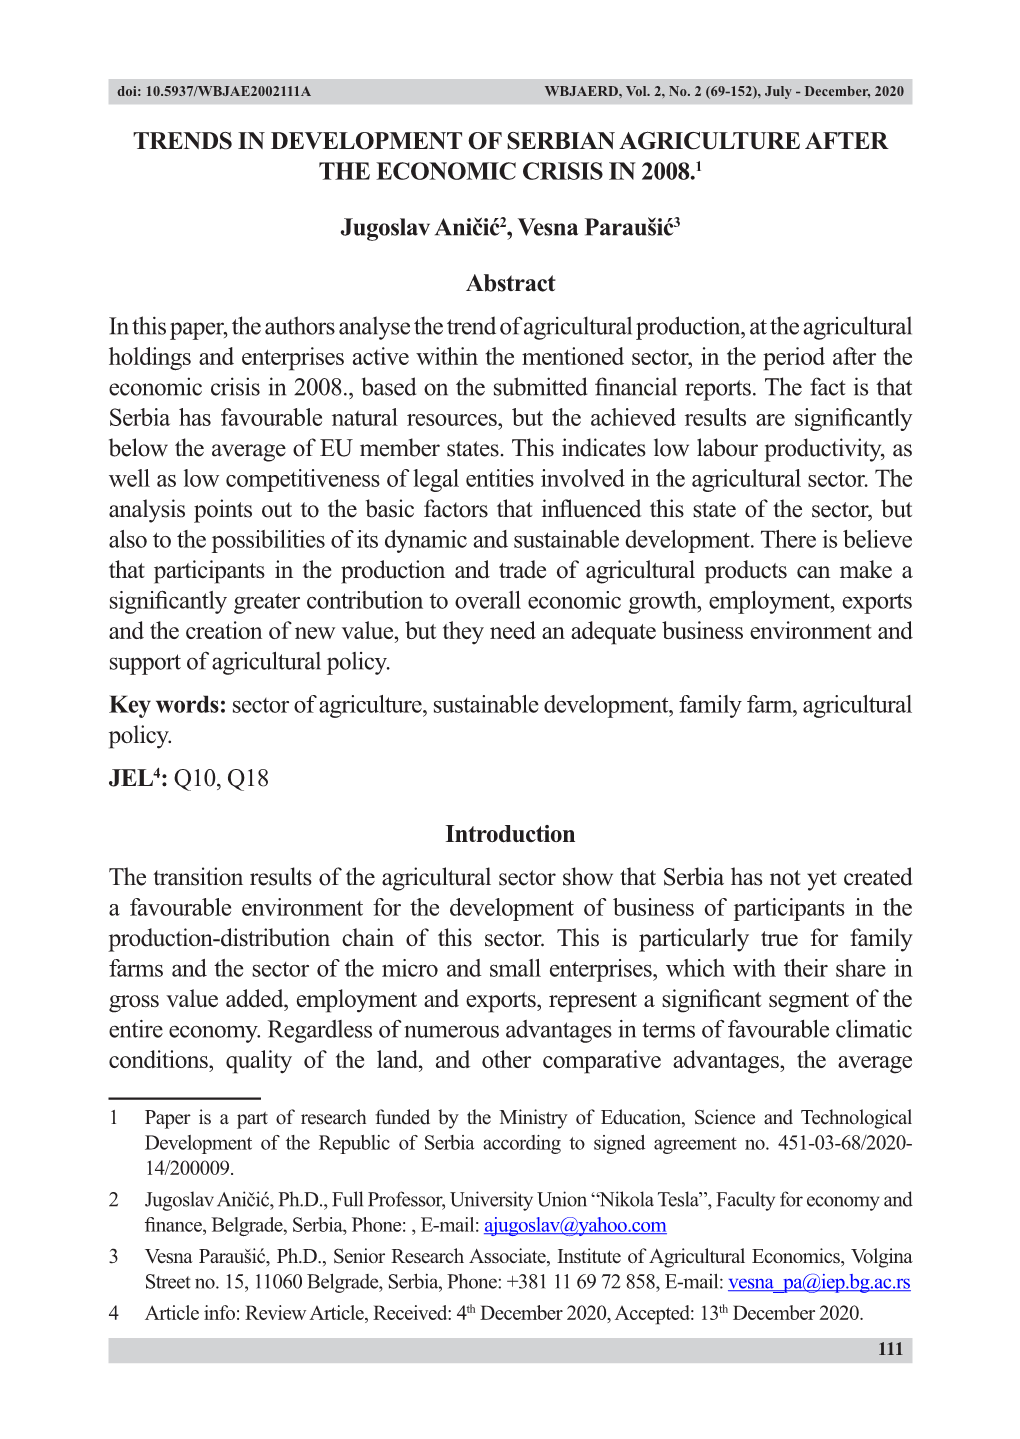 Trends in Development of Serbian Agriculture After the Economic Crisis in 2008.1